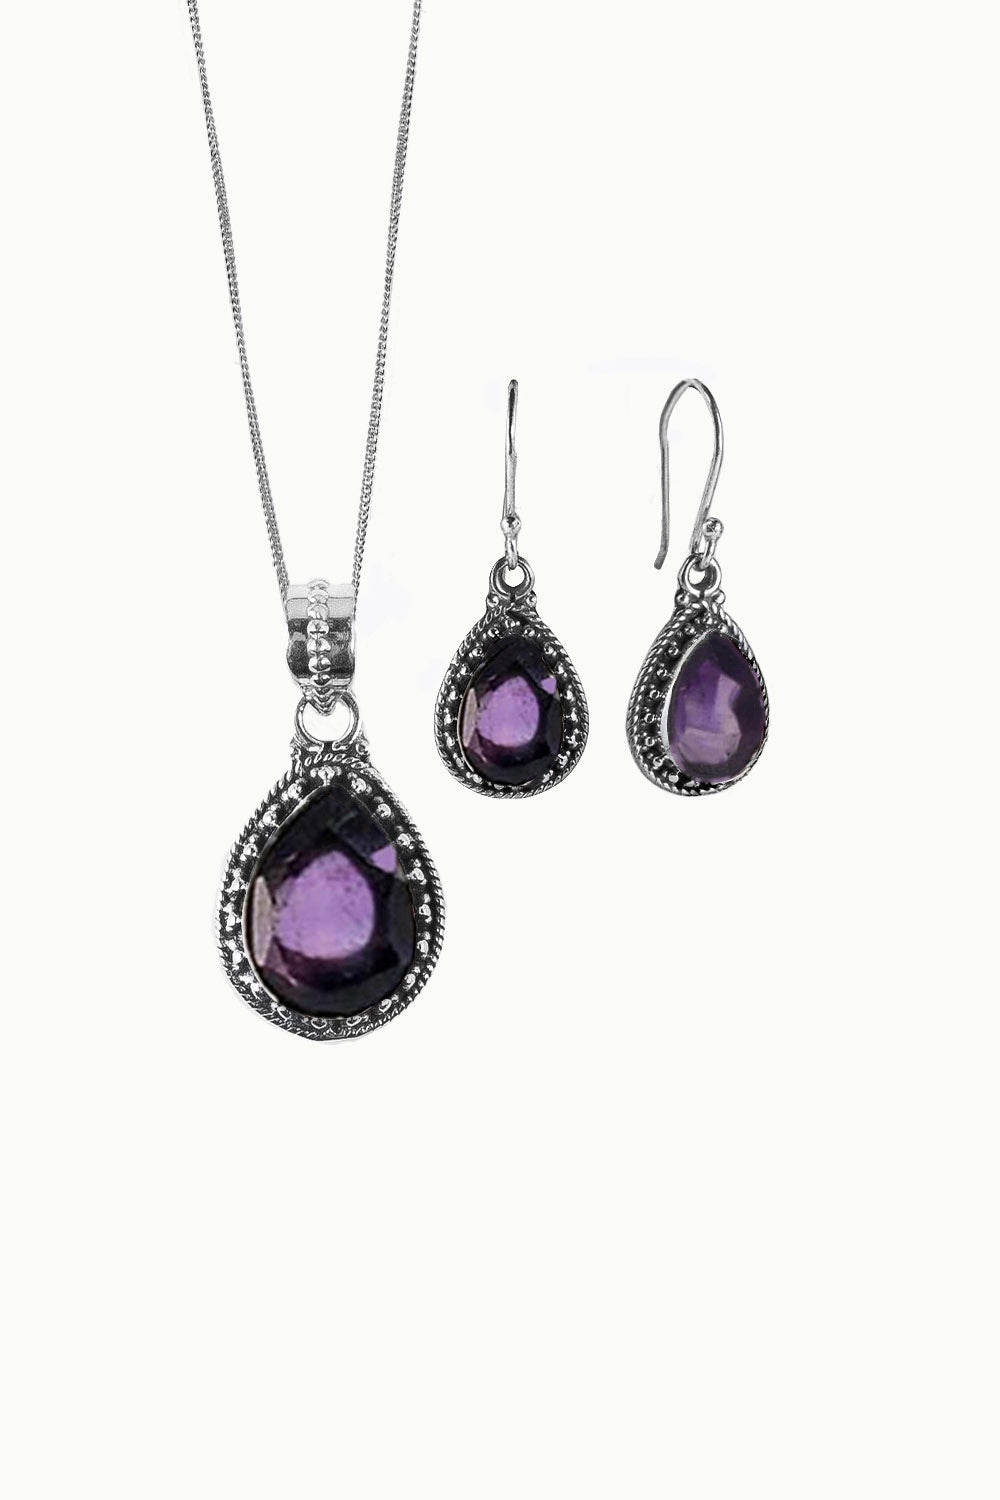 Amethyst Necklace and Earrings Set Sterling Silver - Amalfi